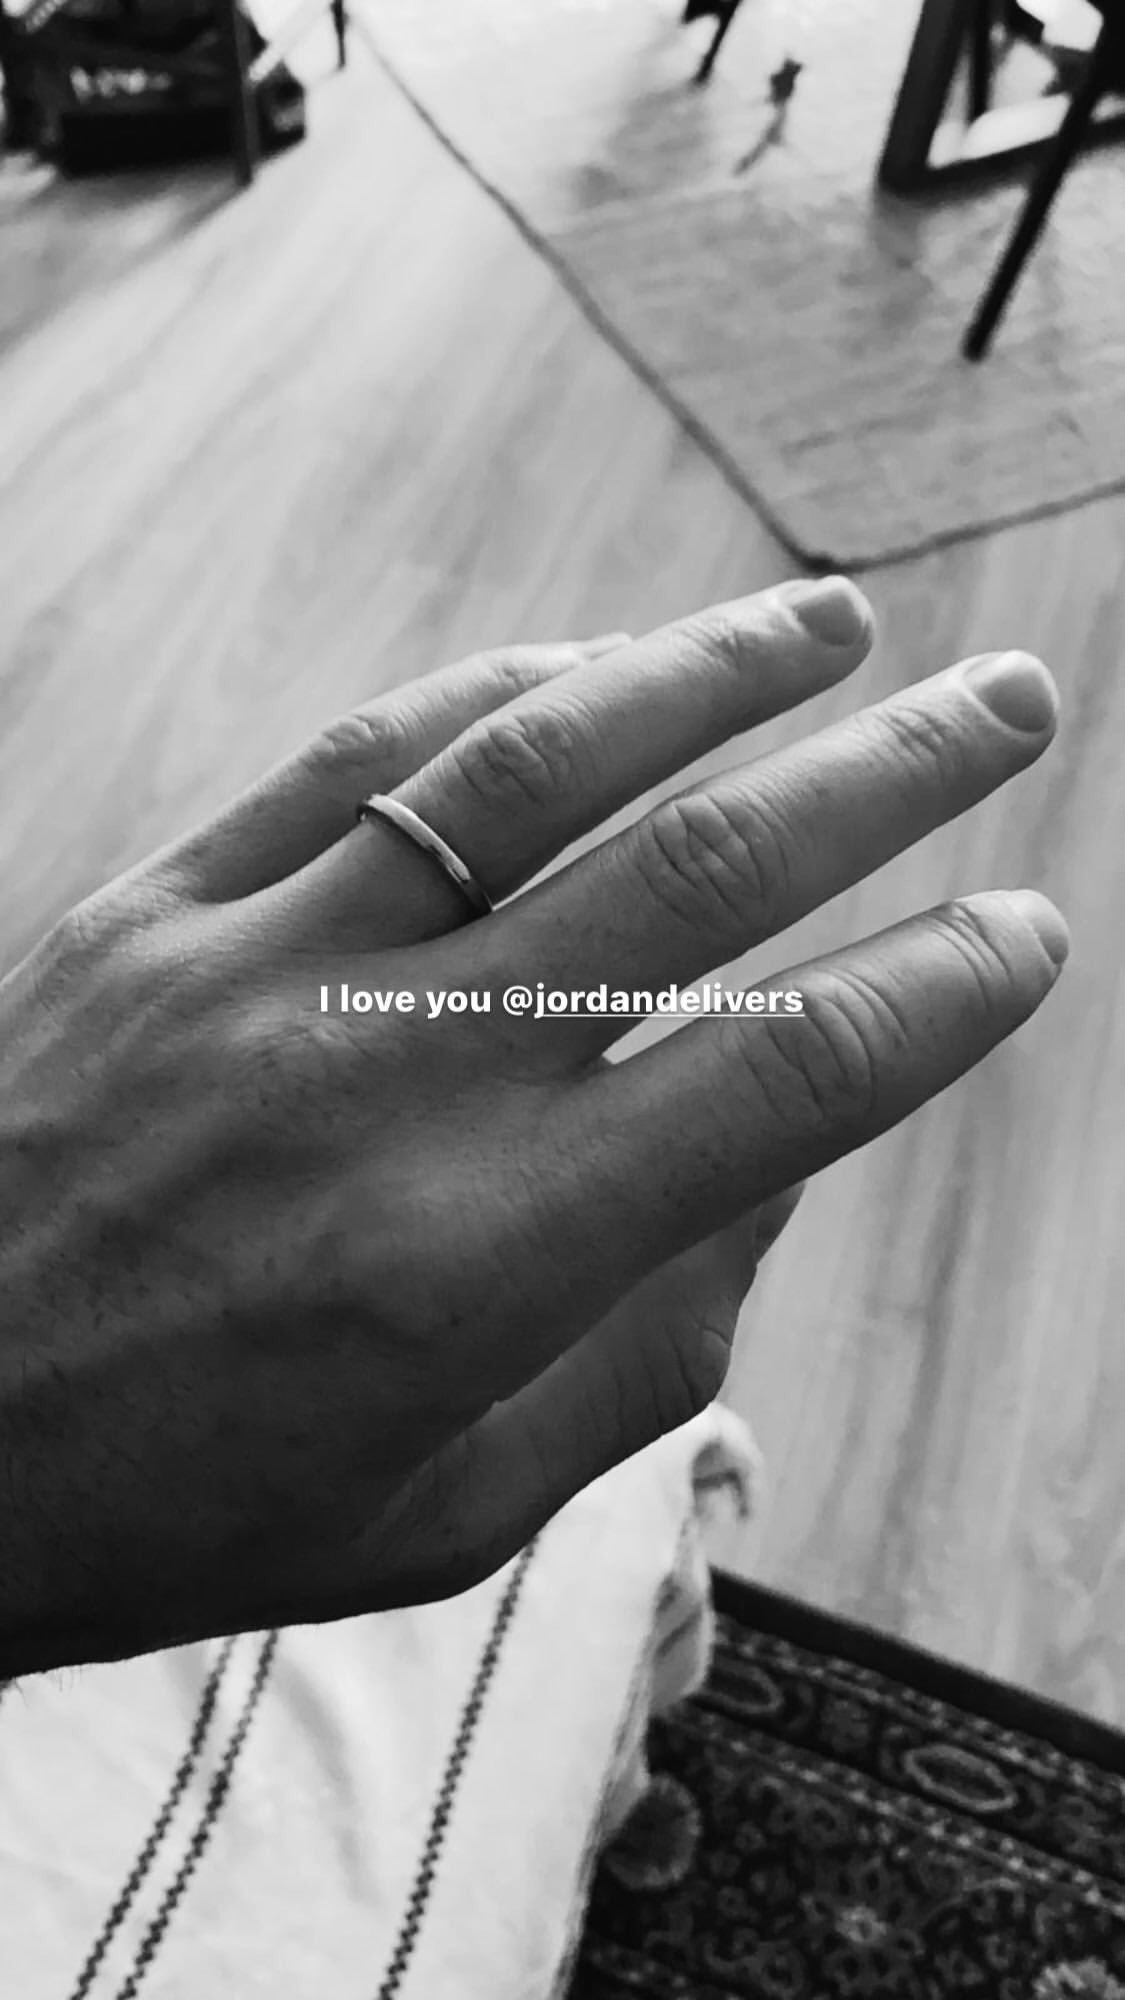 Duncan Laurence shared a glimpse at his engagement ring